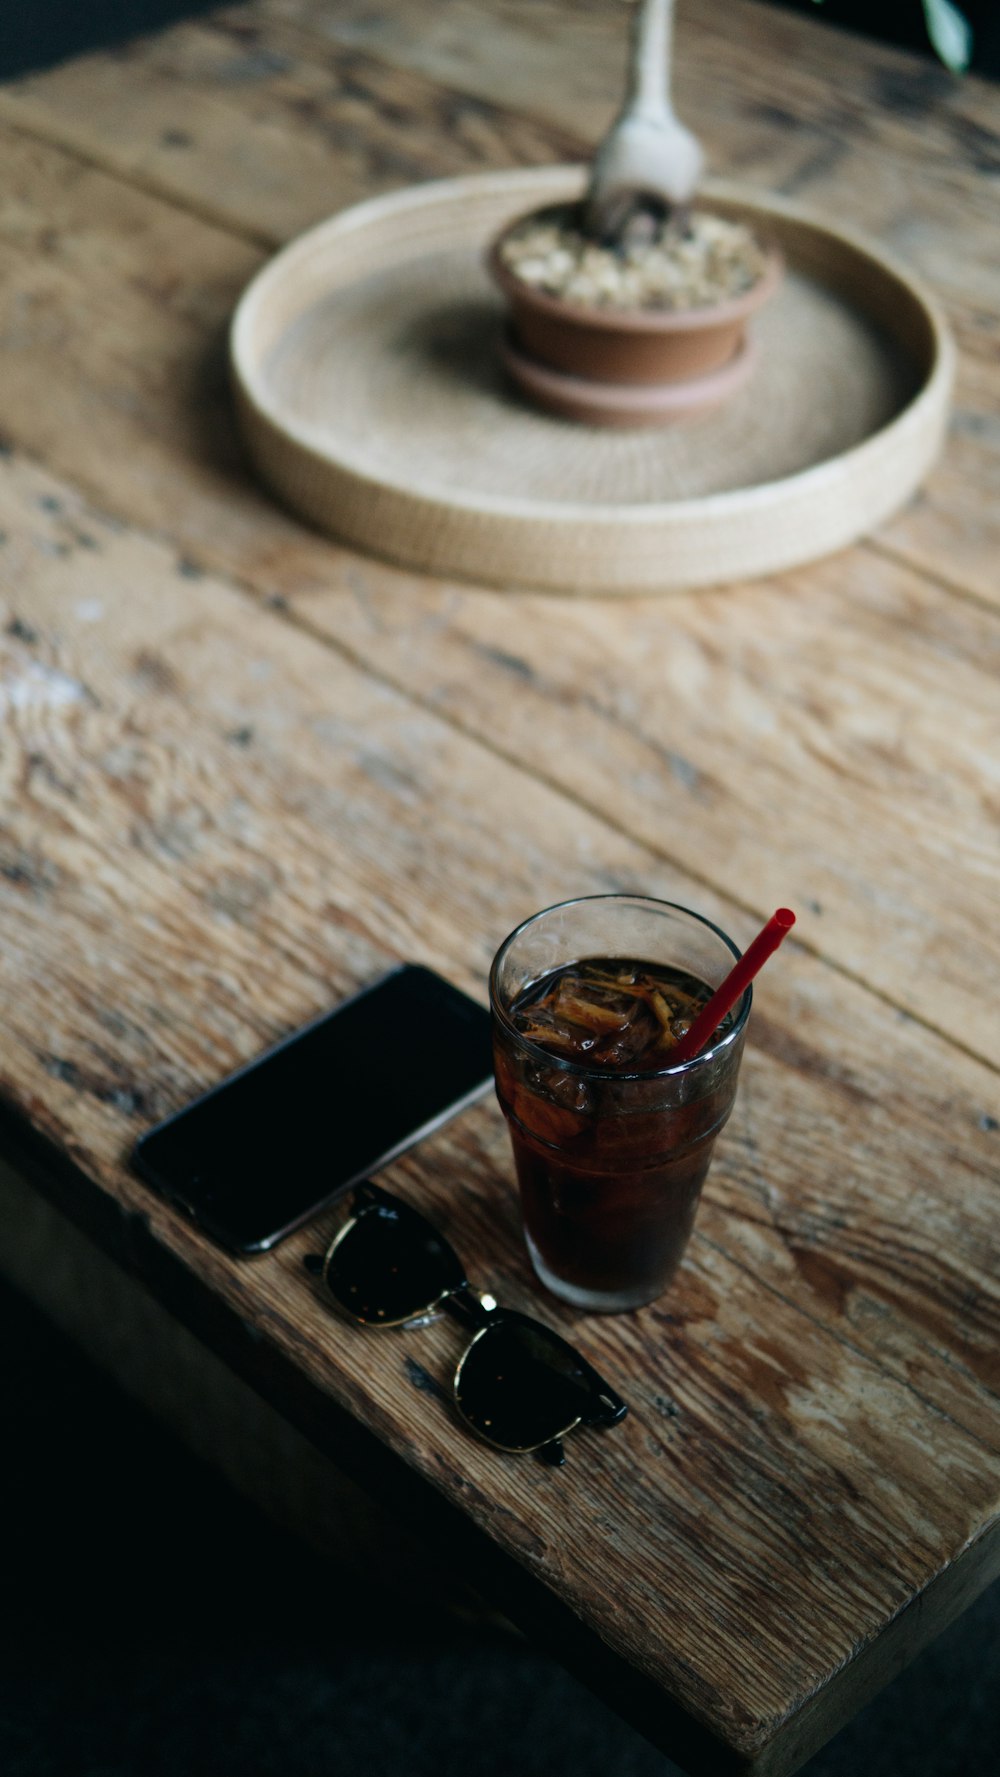 clear drinking glass beside black smartphone on brown wooden table